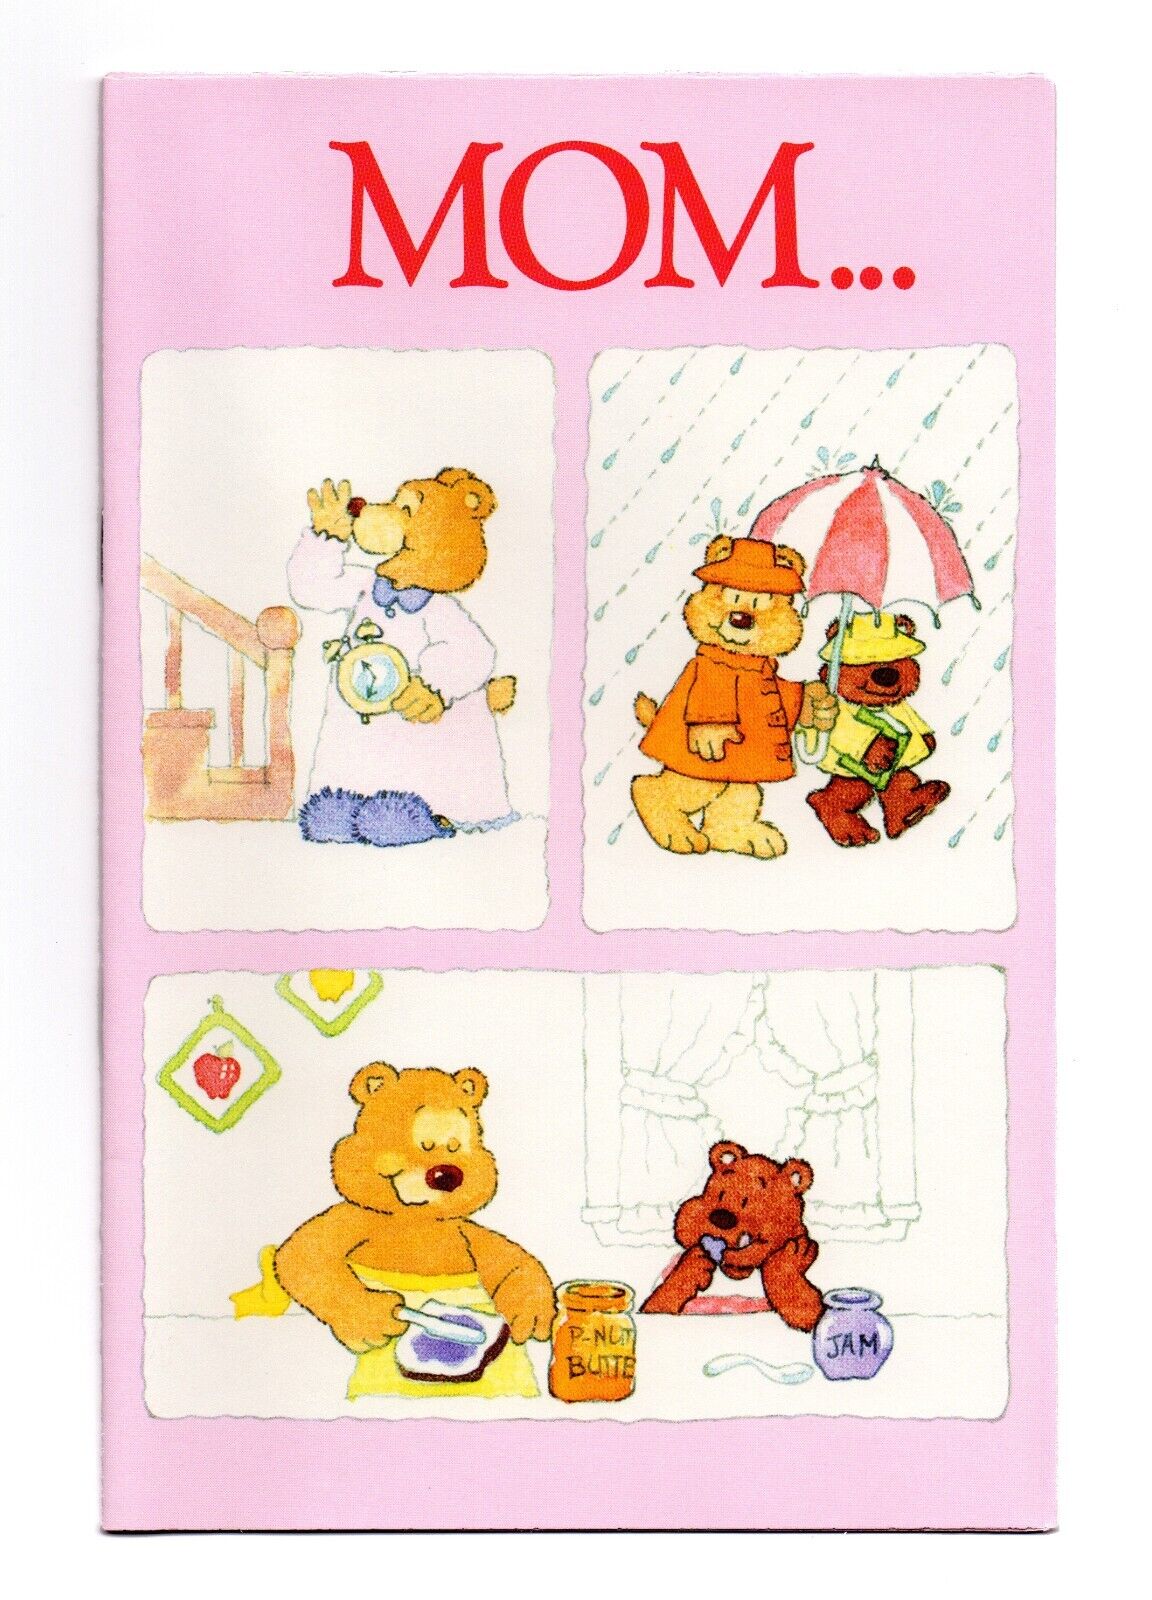 Cute Vintage MOTHER'S DAY Greeting Card FOR MOM, Teddy Bear Love by Hallmark + ✉